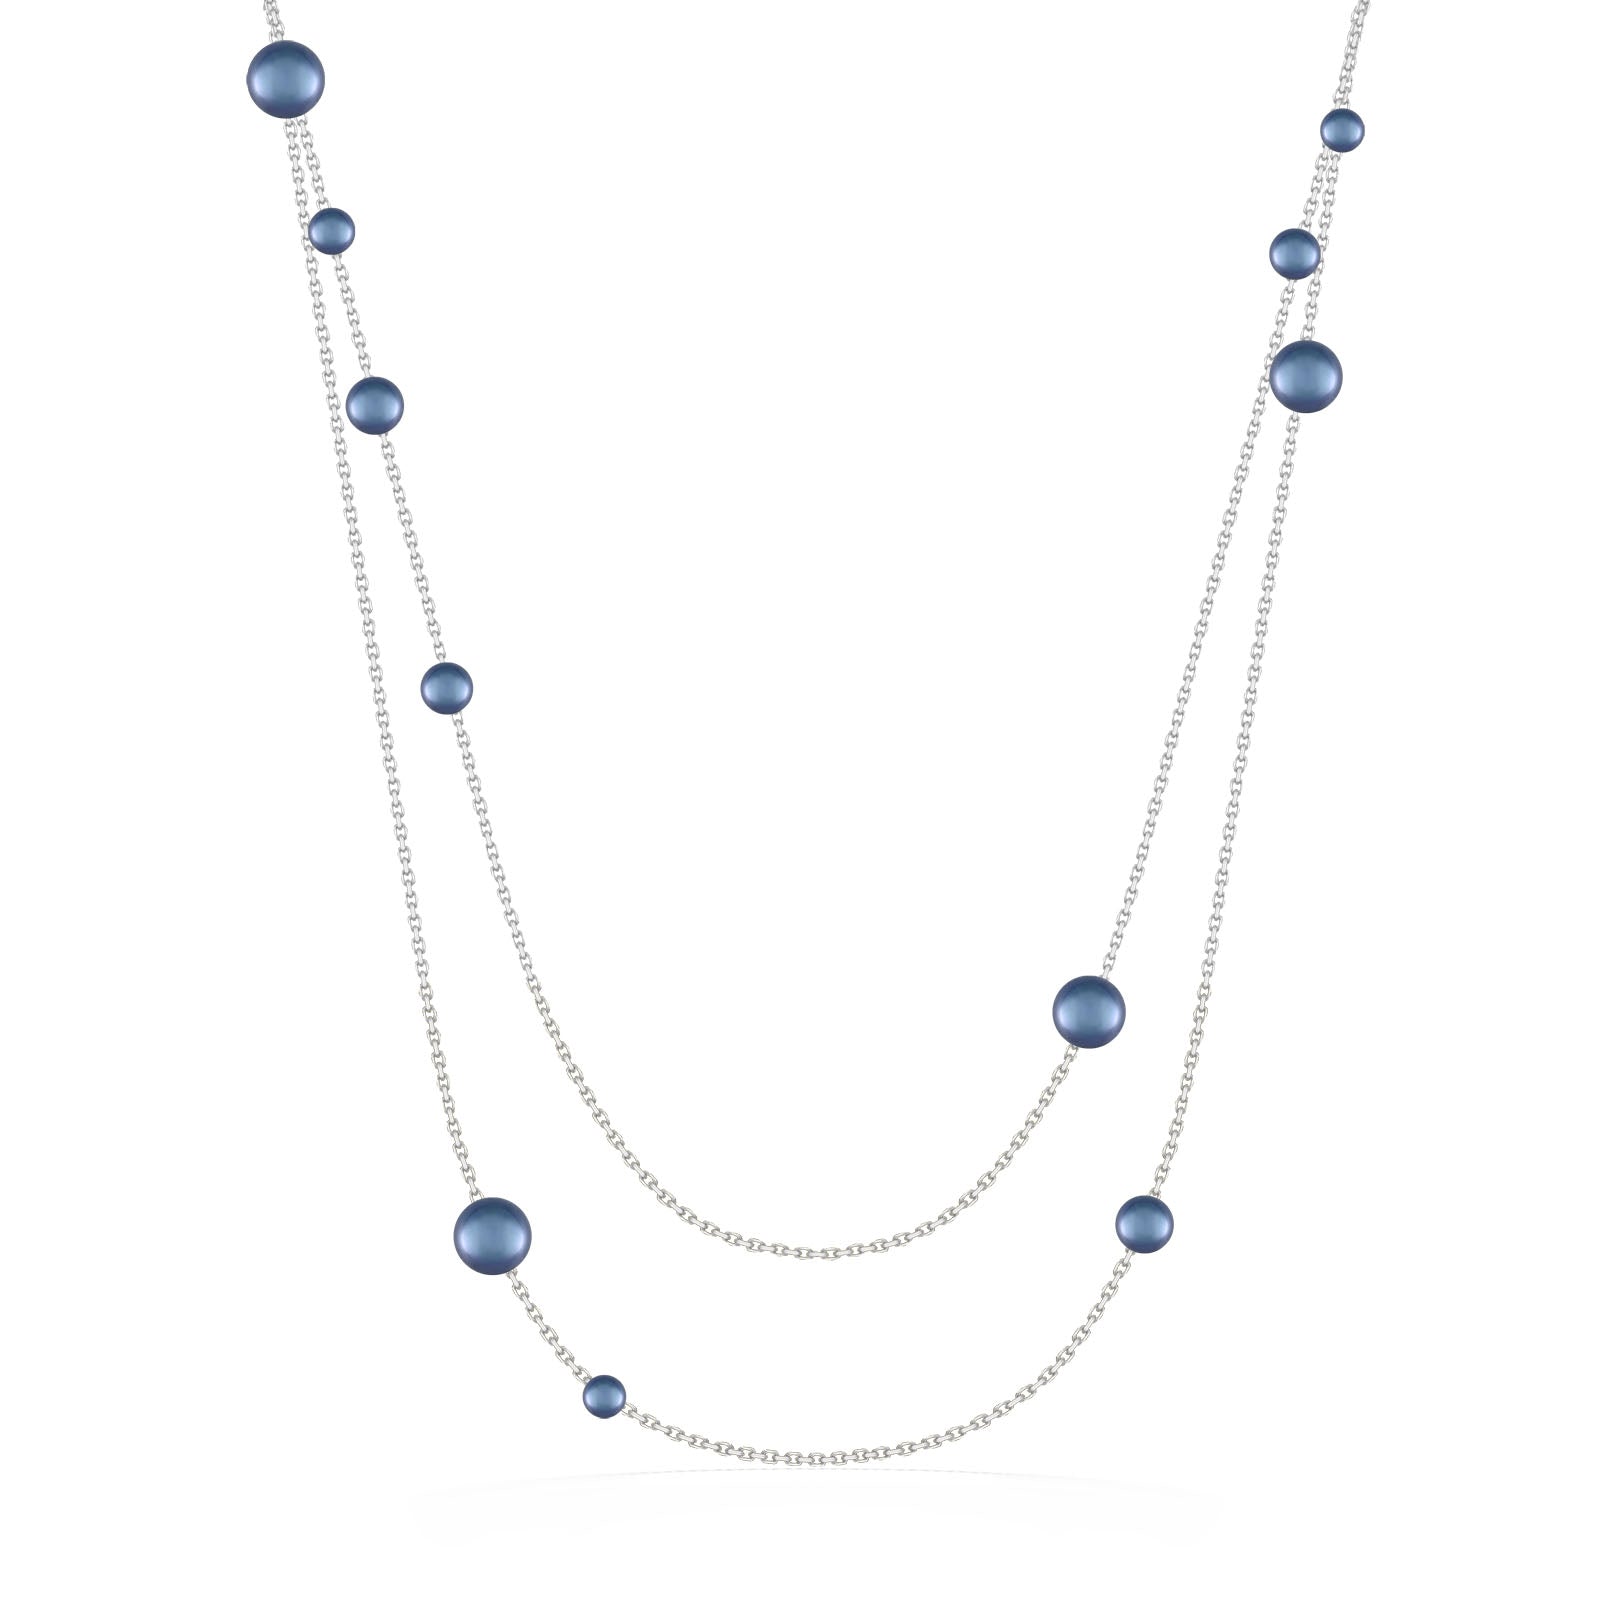 44372 - 14K White Gold - Blue Akoya Pearl Necklace